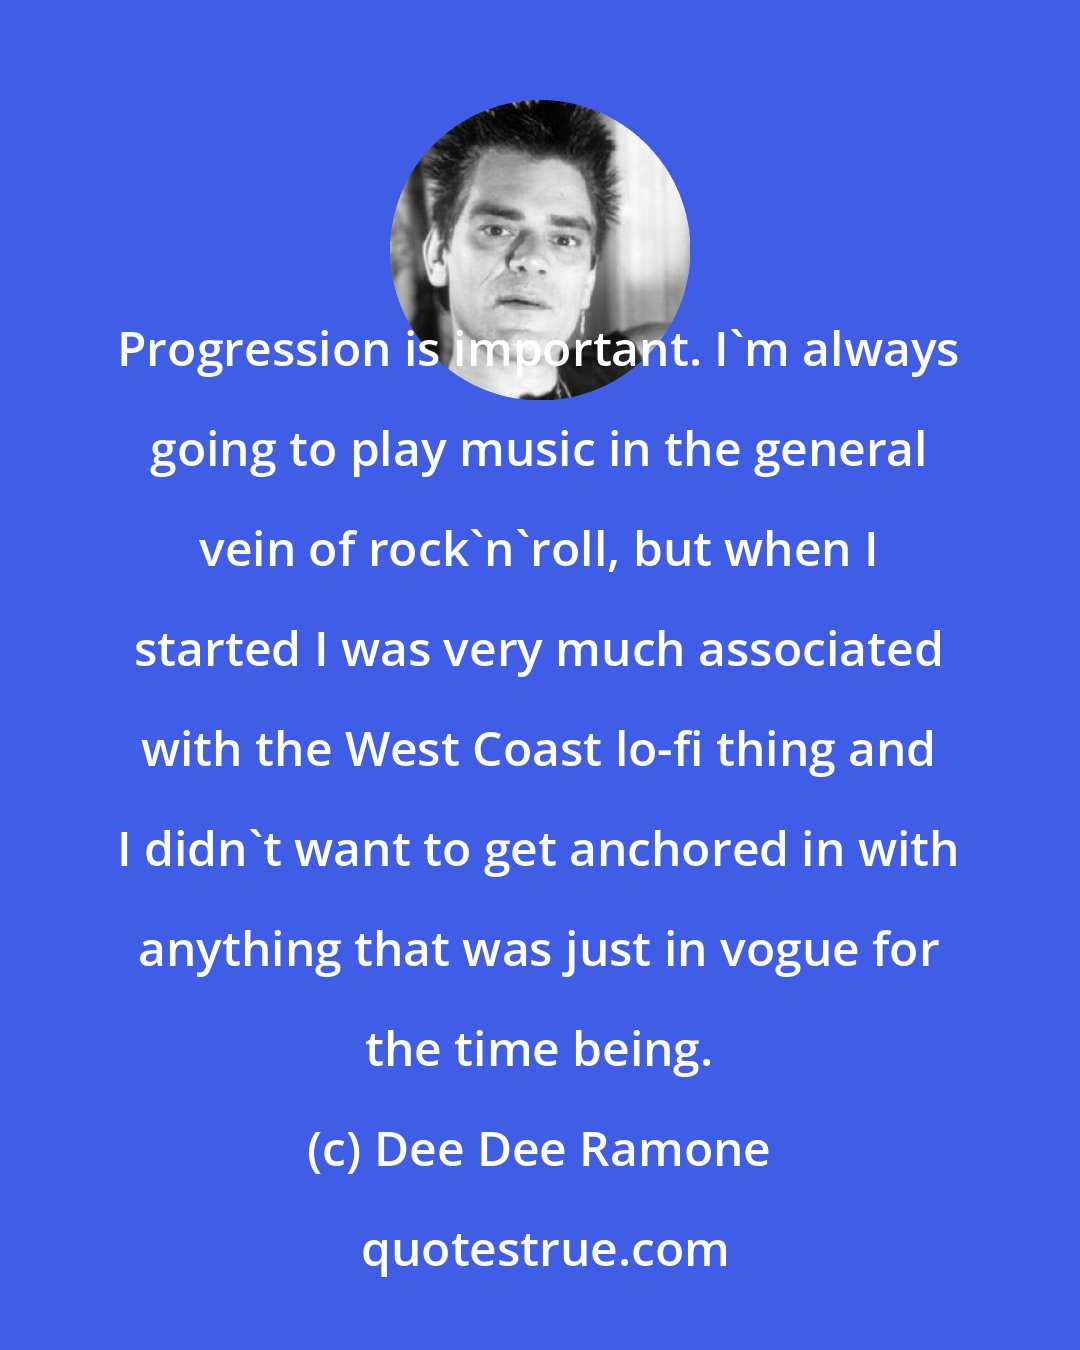 Dee Dee Ramone: Progression is important. I'm always going to play music in the general vein of rock'n'roll, but when I started I was very much associated with the West Coast lo-fi thing and I didn't want to get anchored in with anything that was just in vogue for the time being.